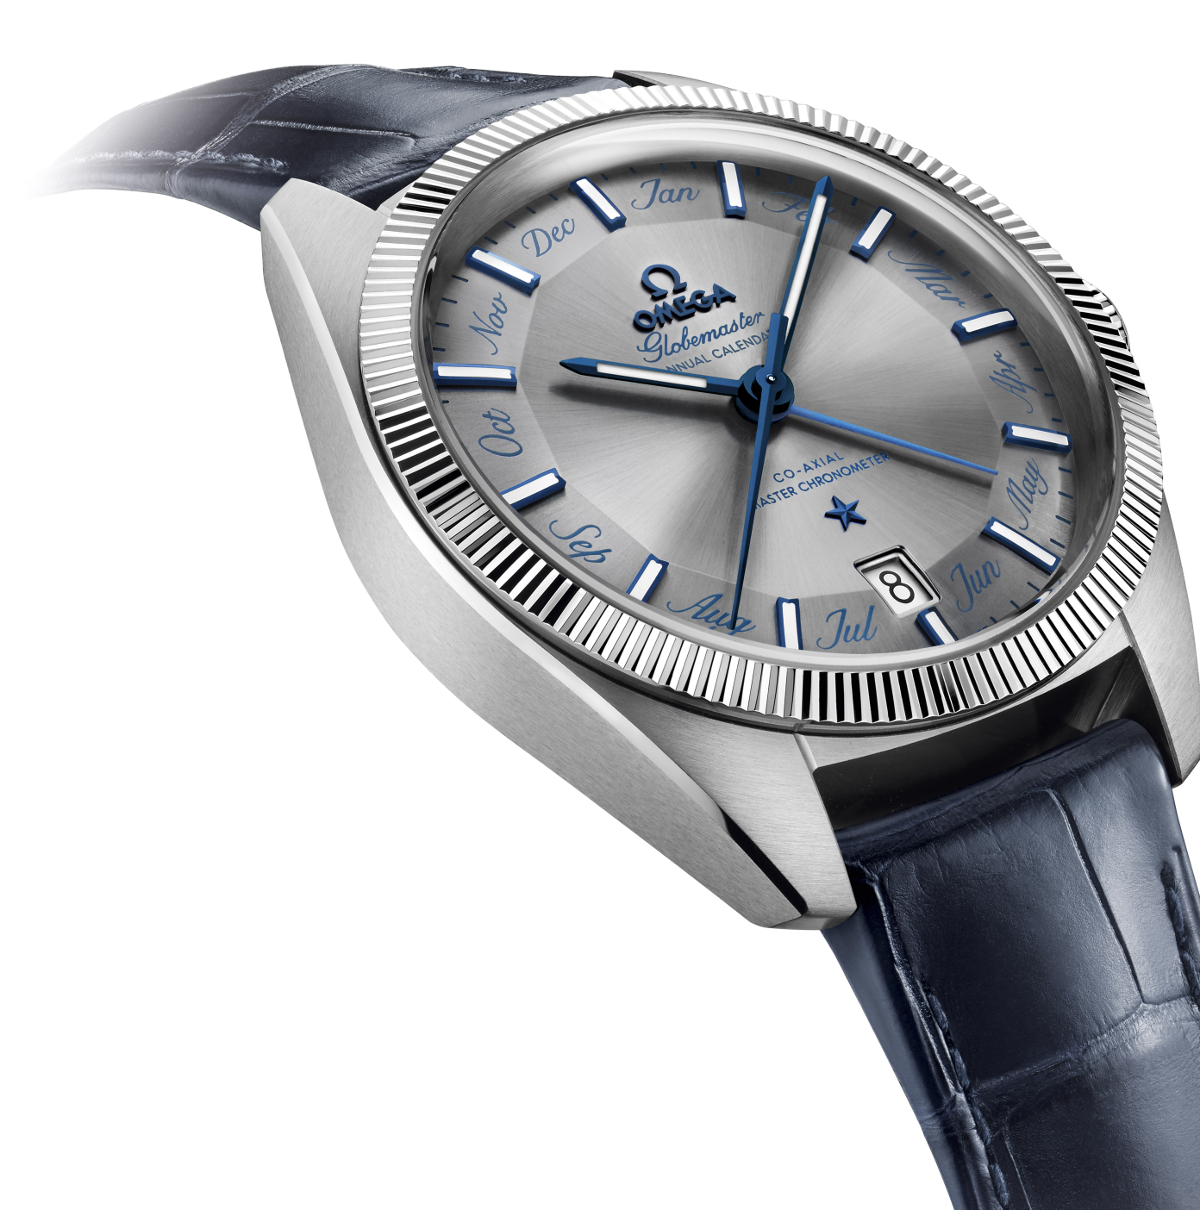 Omega Globemaster Co-axial Master Chronometer Annual Calendar - timeandwatches.pl